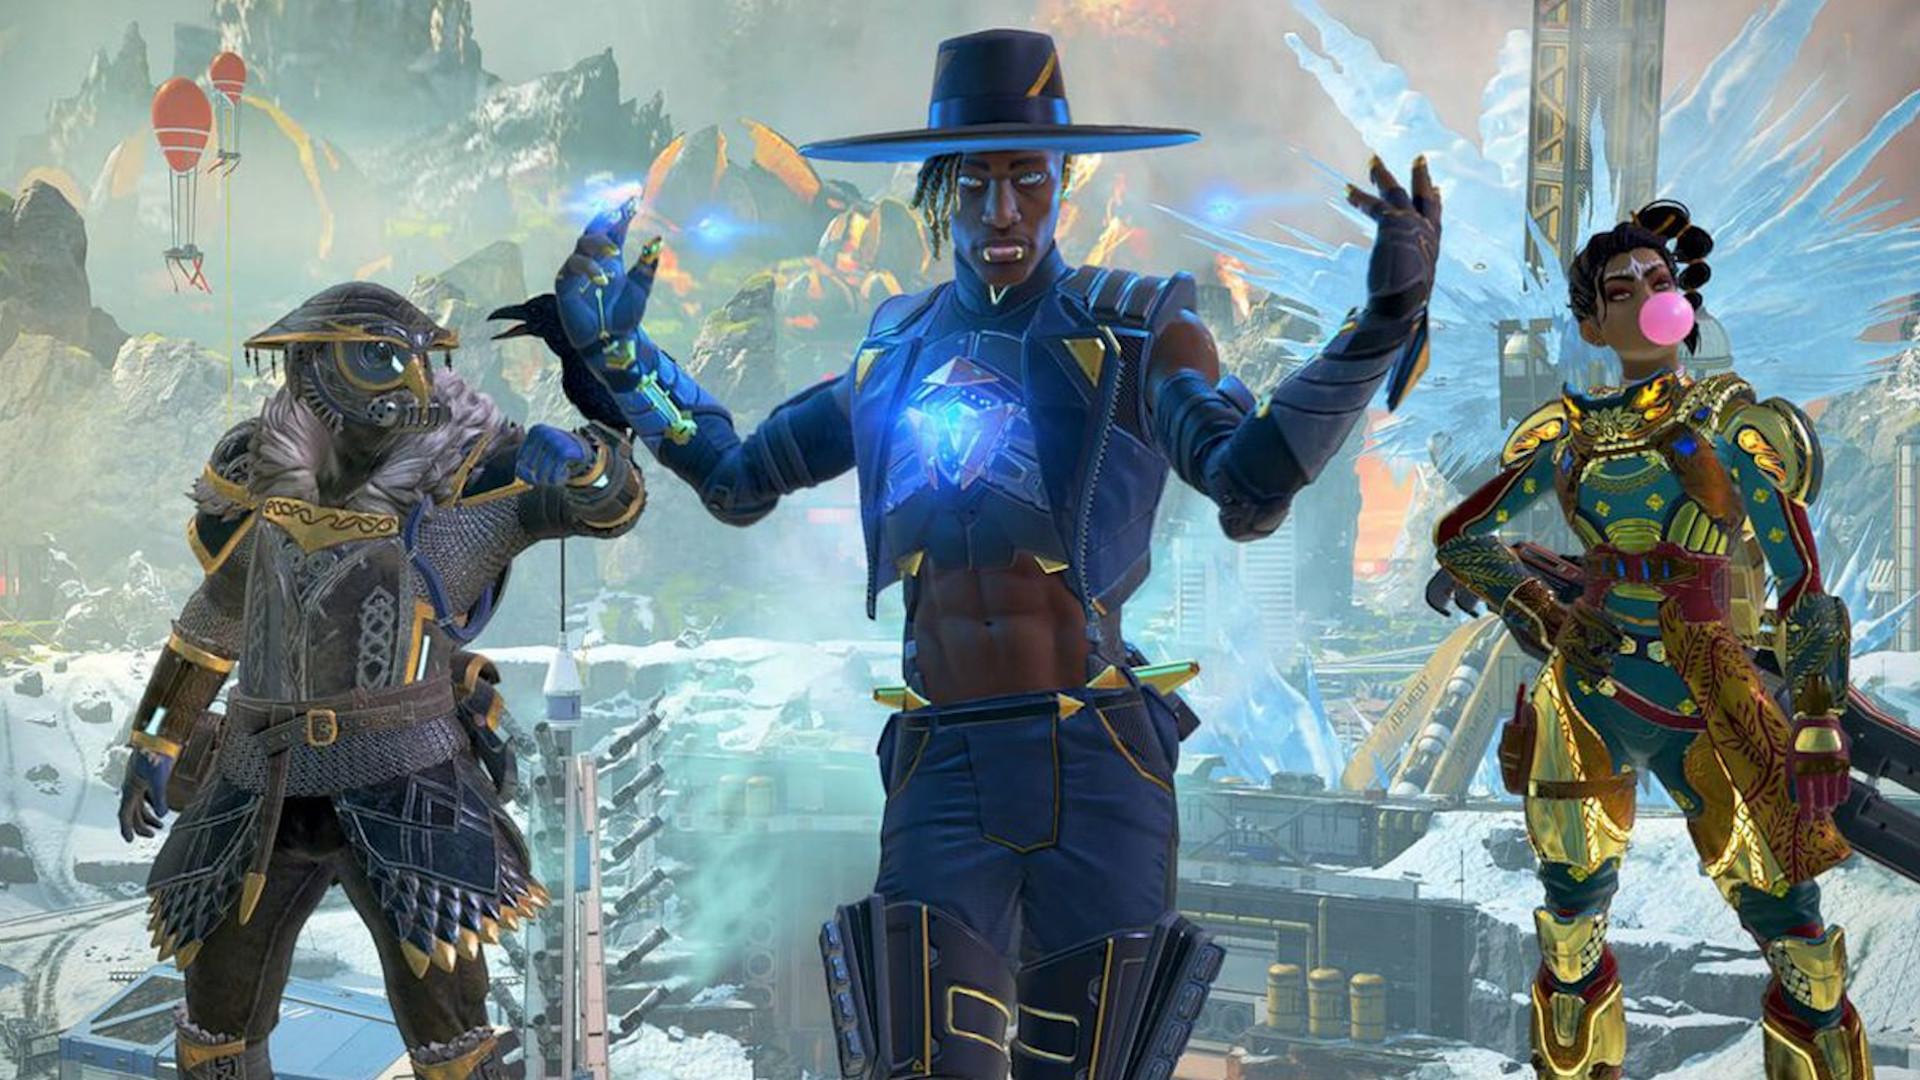 Apex Legends crossprogression is still coming, but it’s “gnarly as